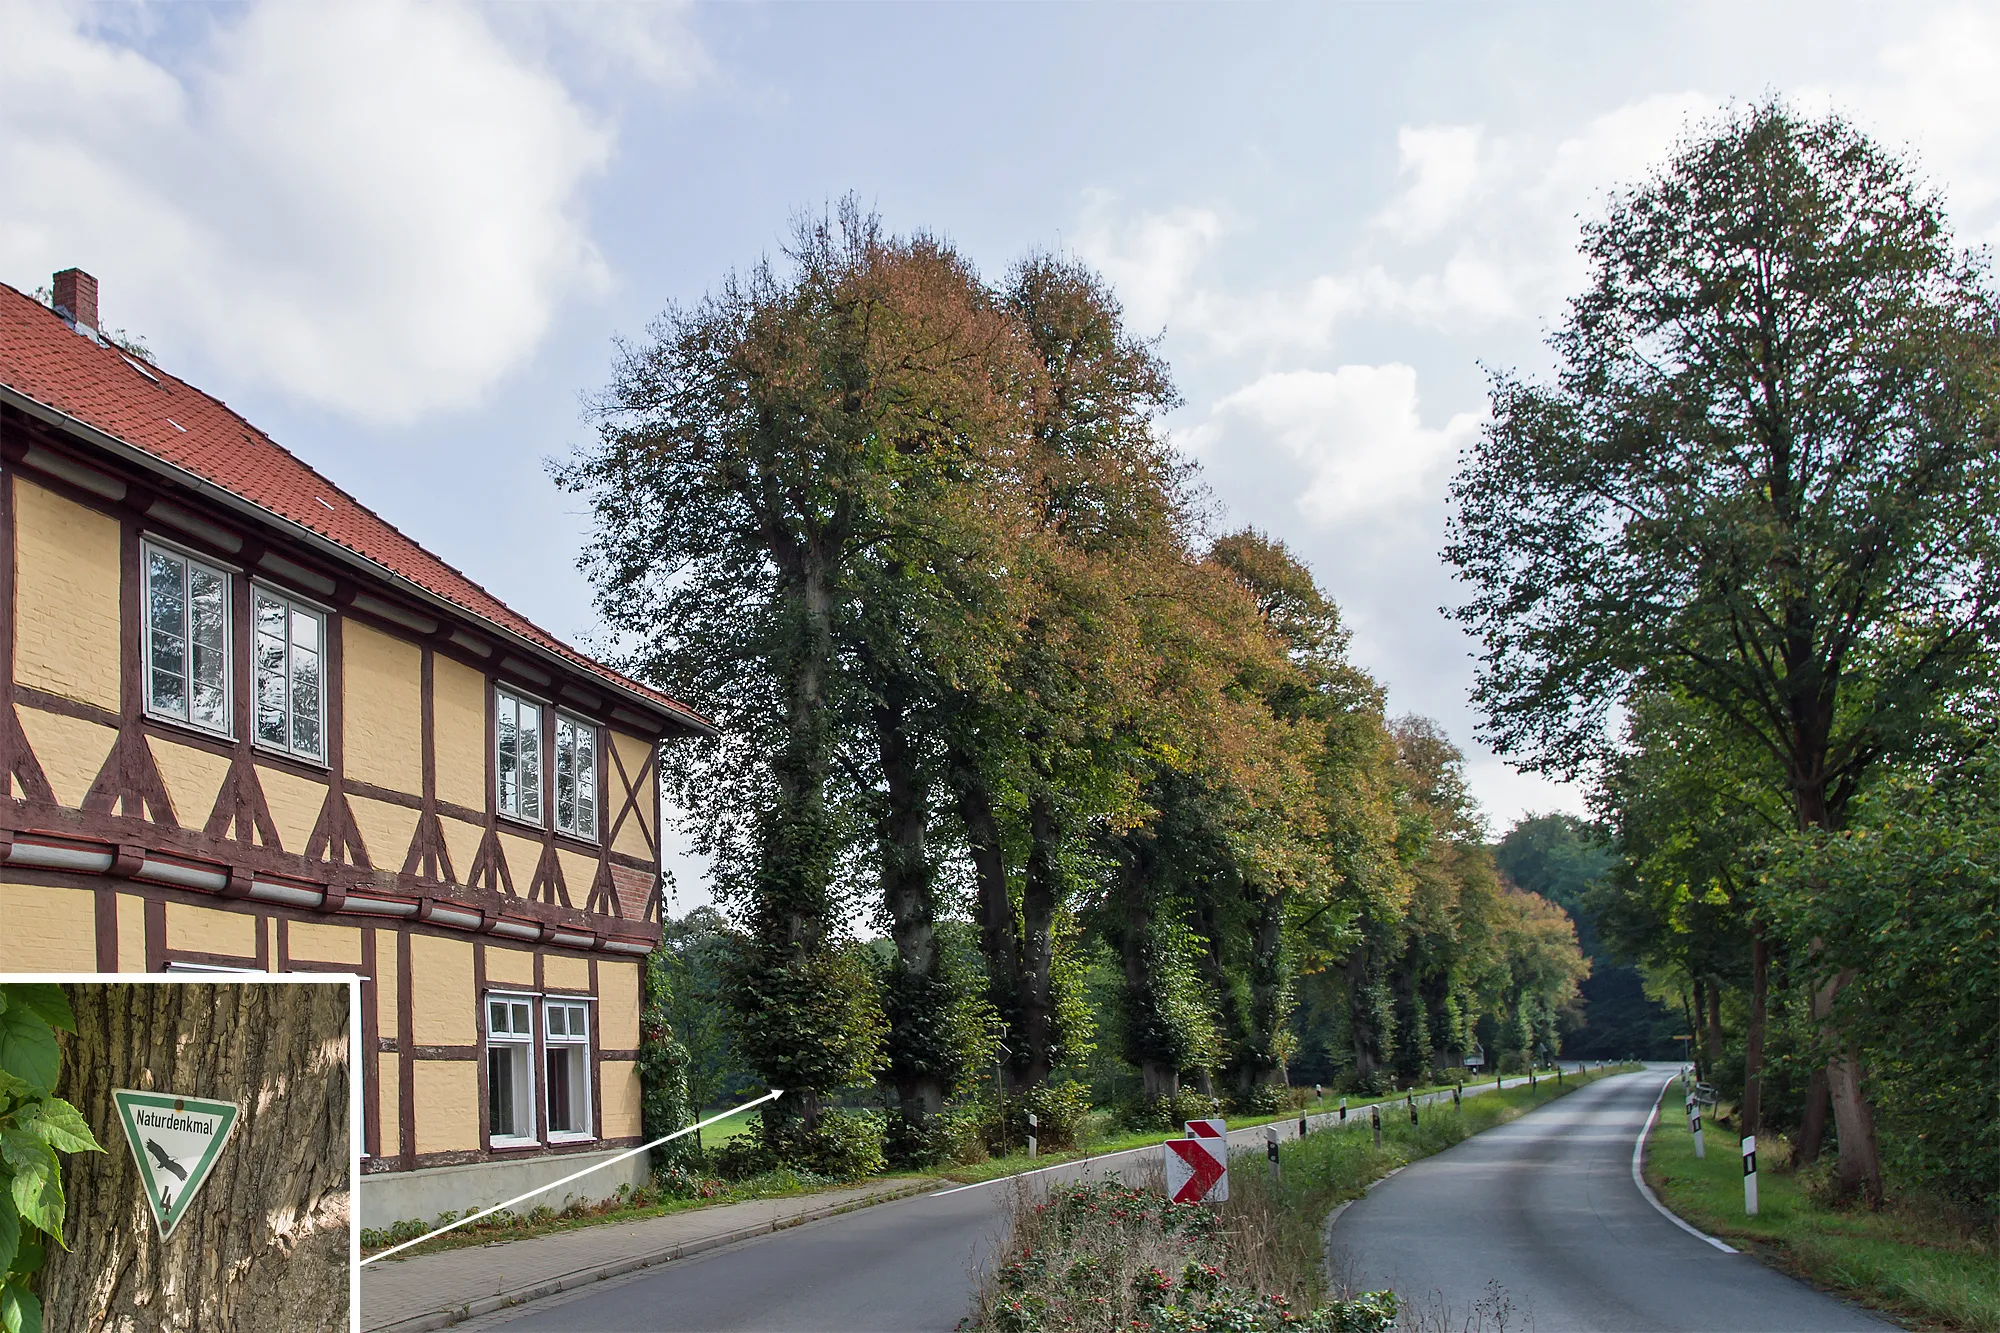 Photo showing: Natural monument "Göhrde Avenue" in the village Göhrde (district Lüchow-Dannenberg, north-eastern Lower Saxony, Germany).